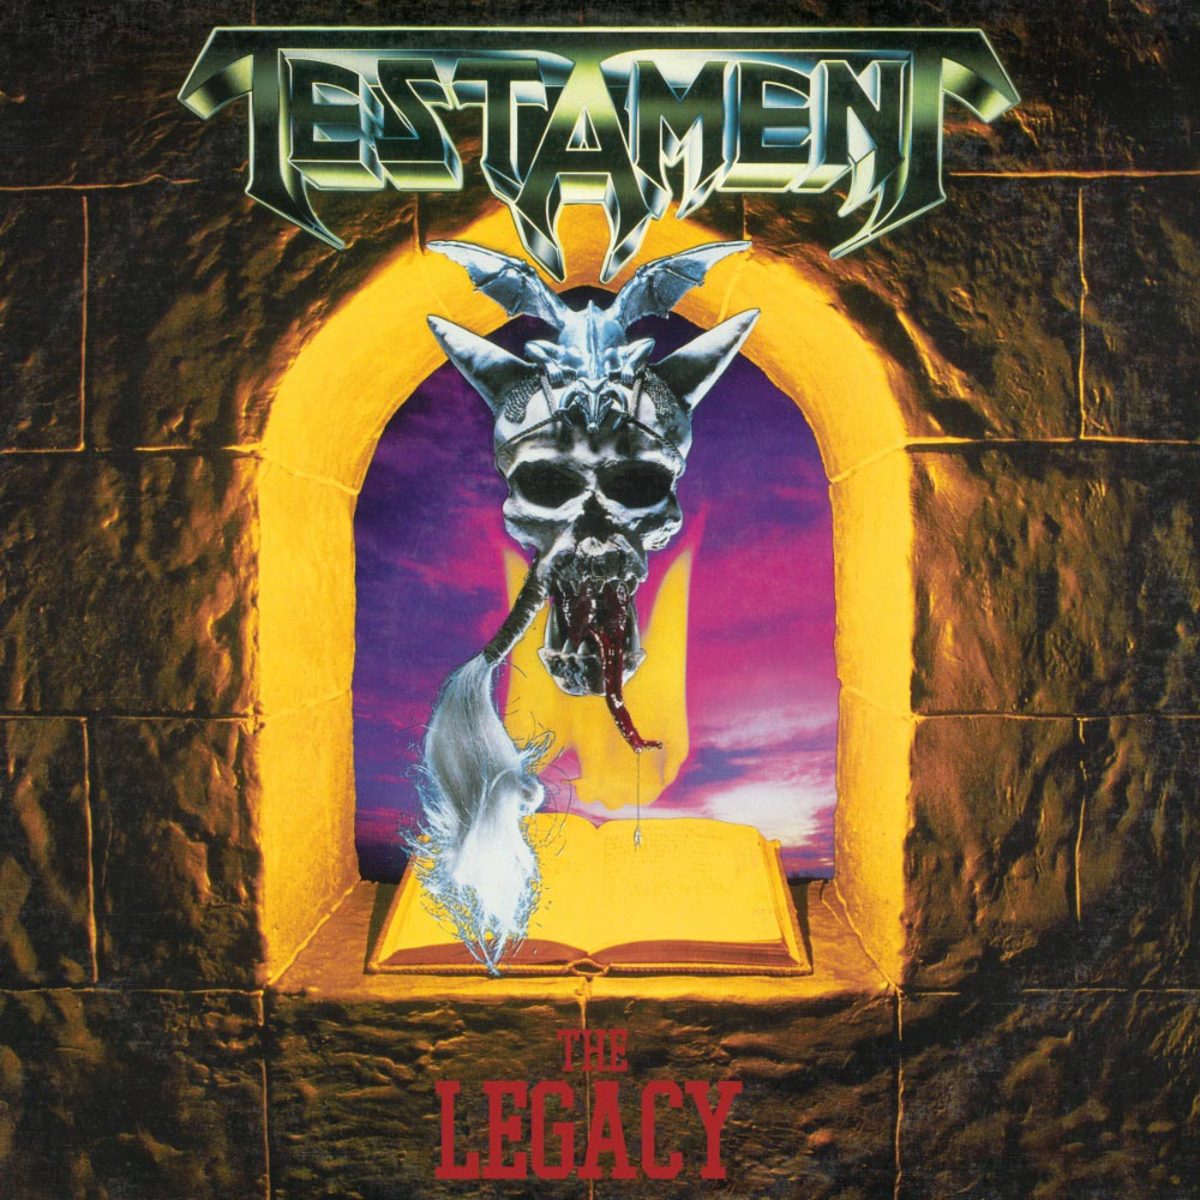 testament-the-legacy-album-review-this-bay-area-thrash-metal-band-releases-a-very-solid-debut-album